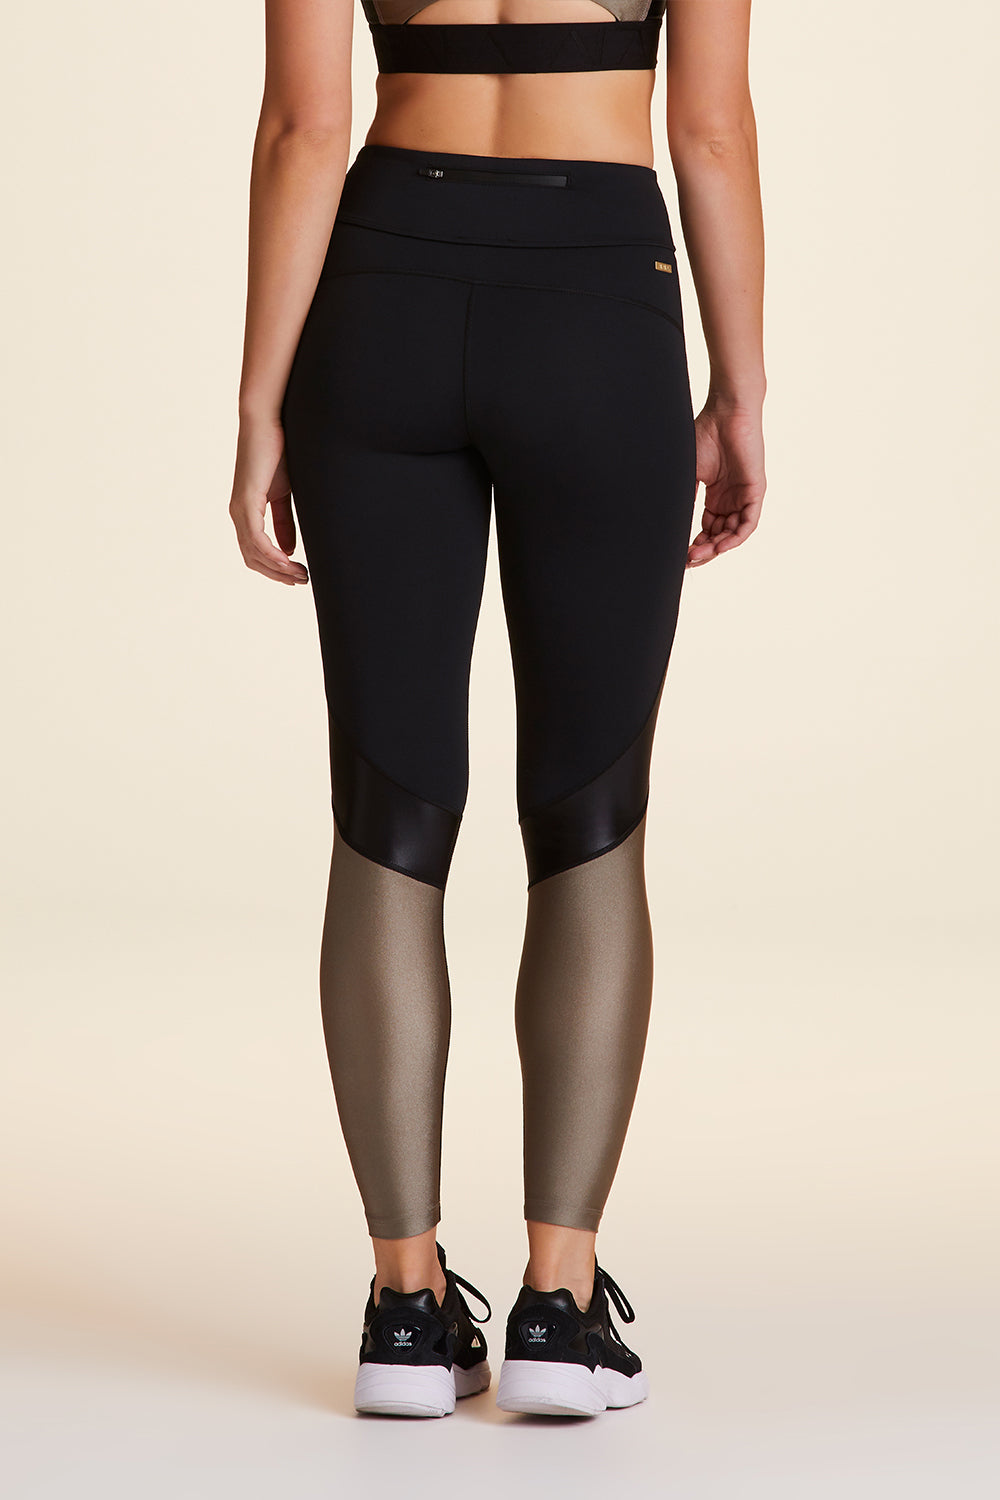 Back view of Alala Luxury Women's Athleisure captain ankle tight in black and gold dust